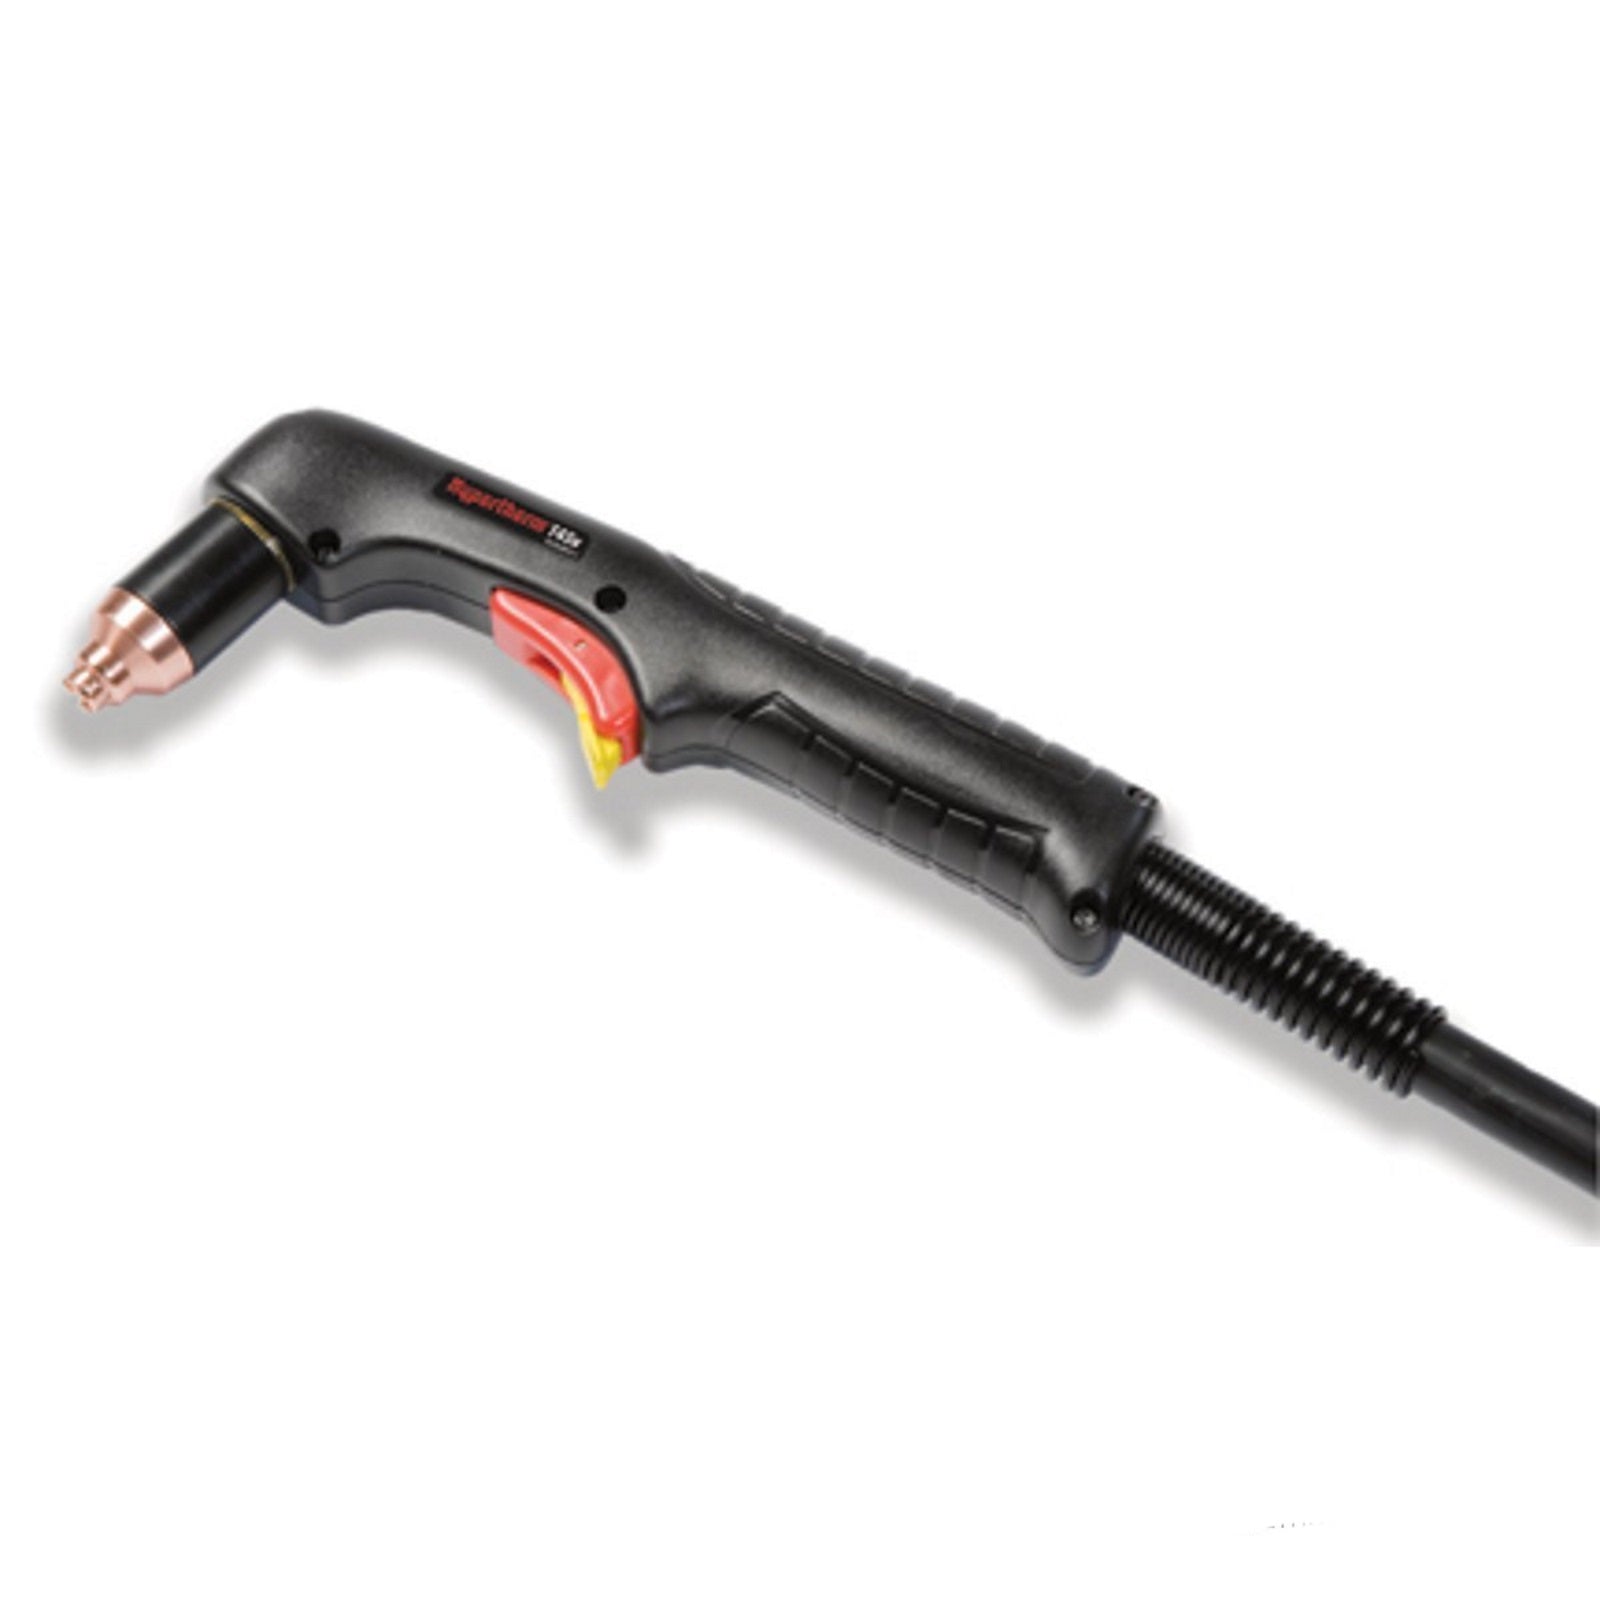 Hypertherm T45v Hand Torch Assembly with 20' Lead (088008)